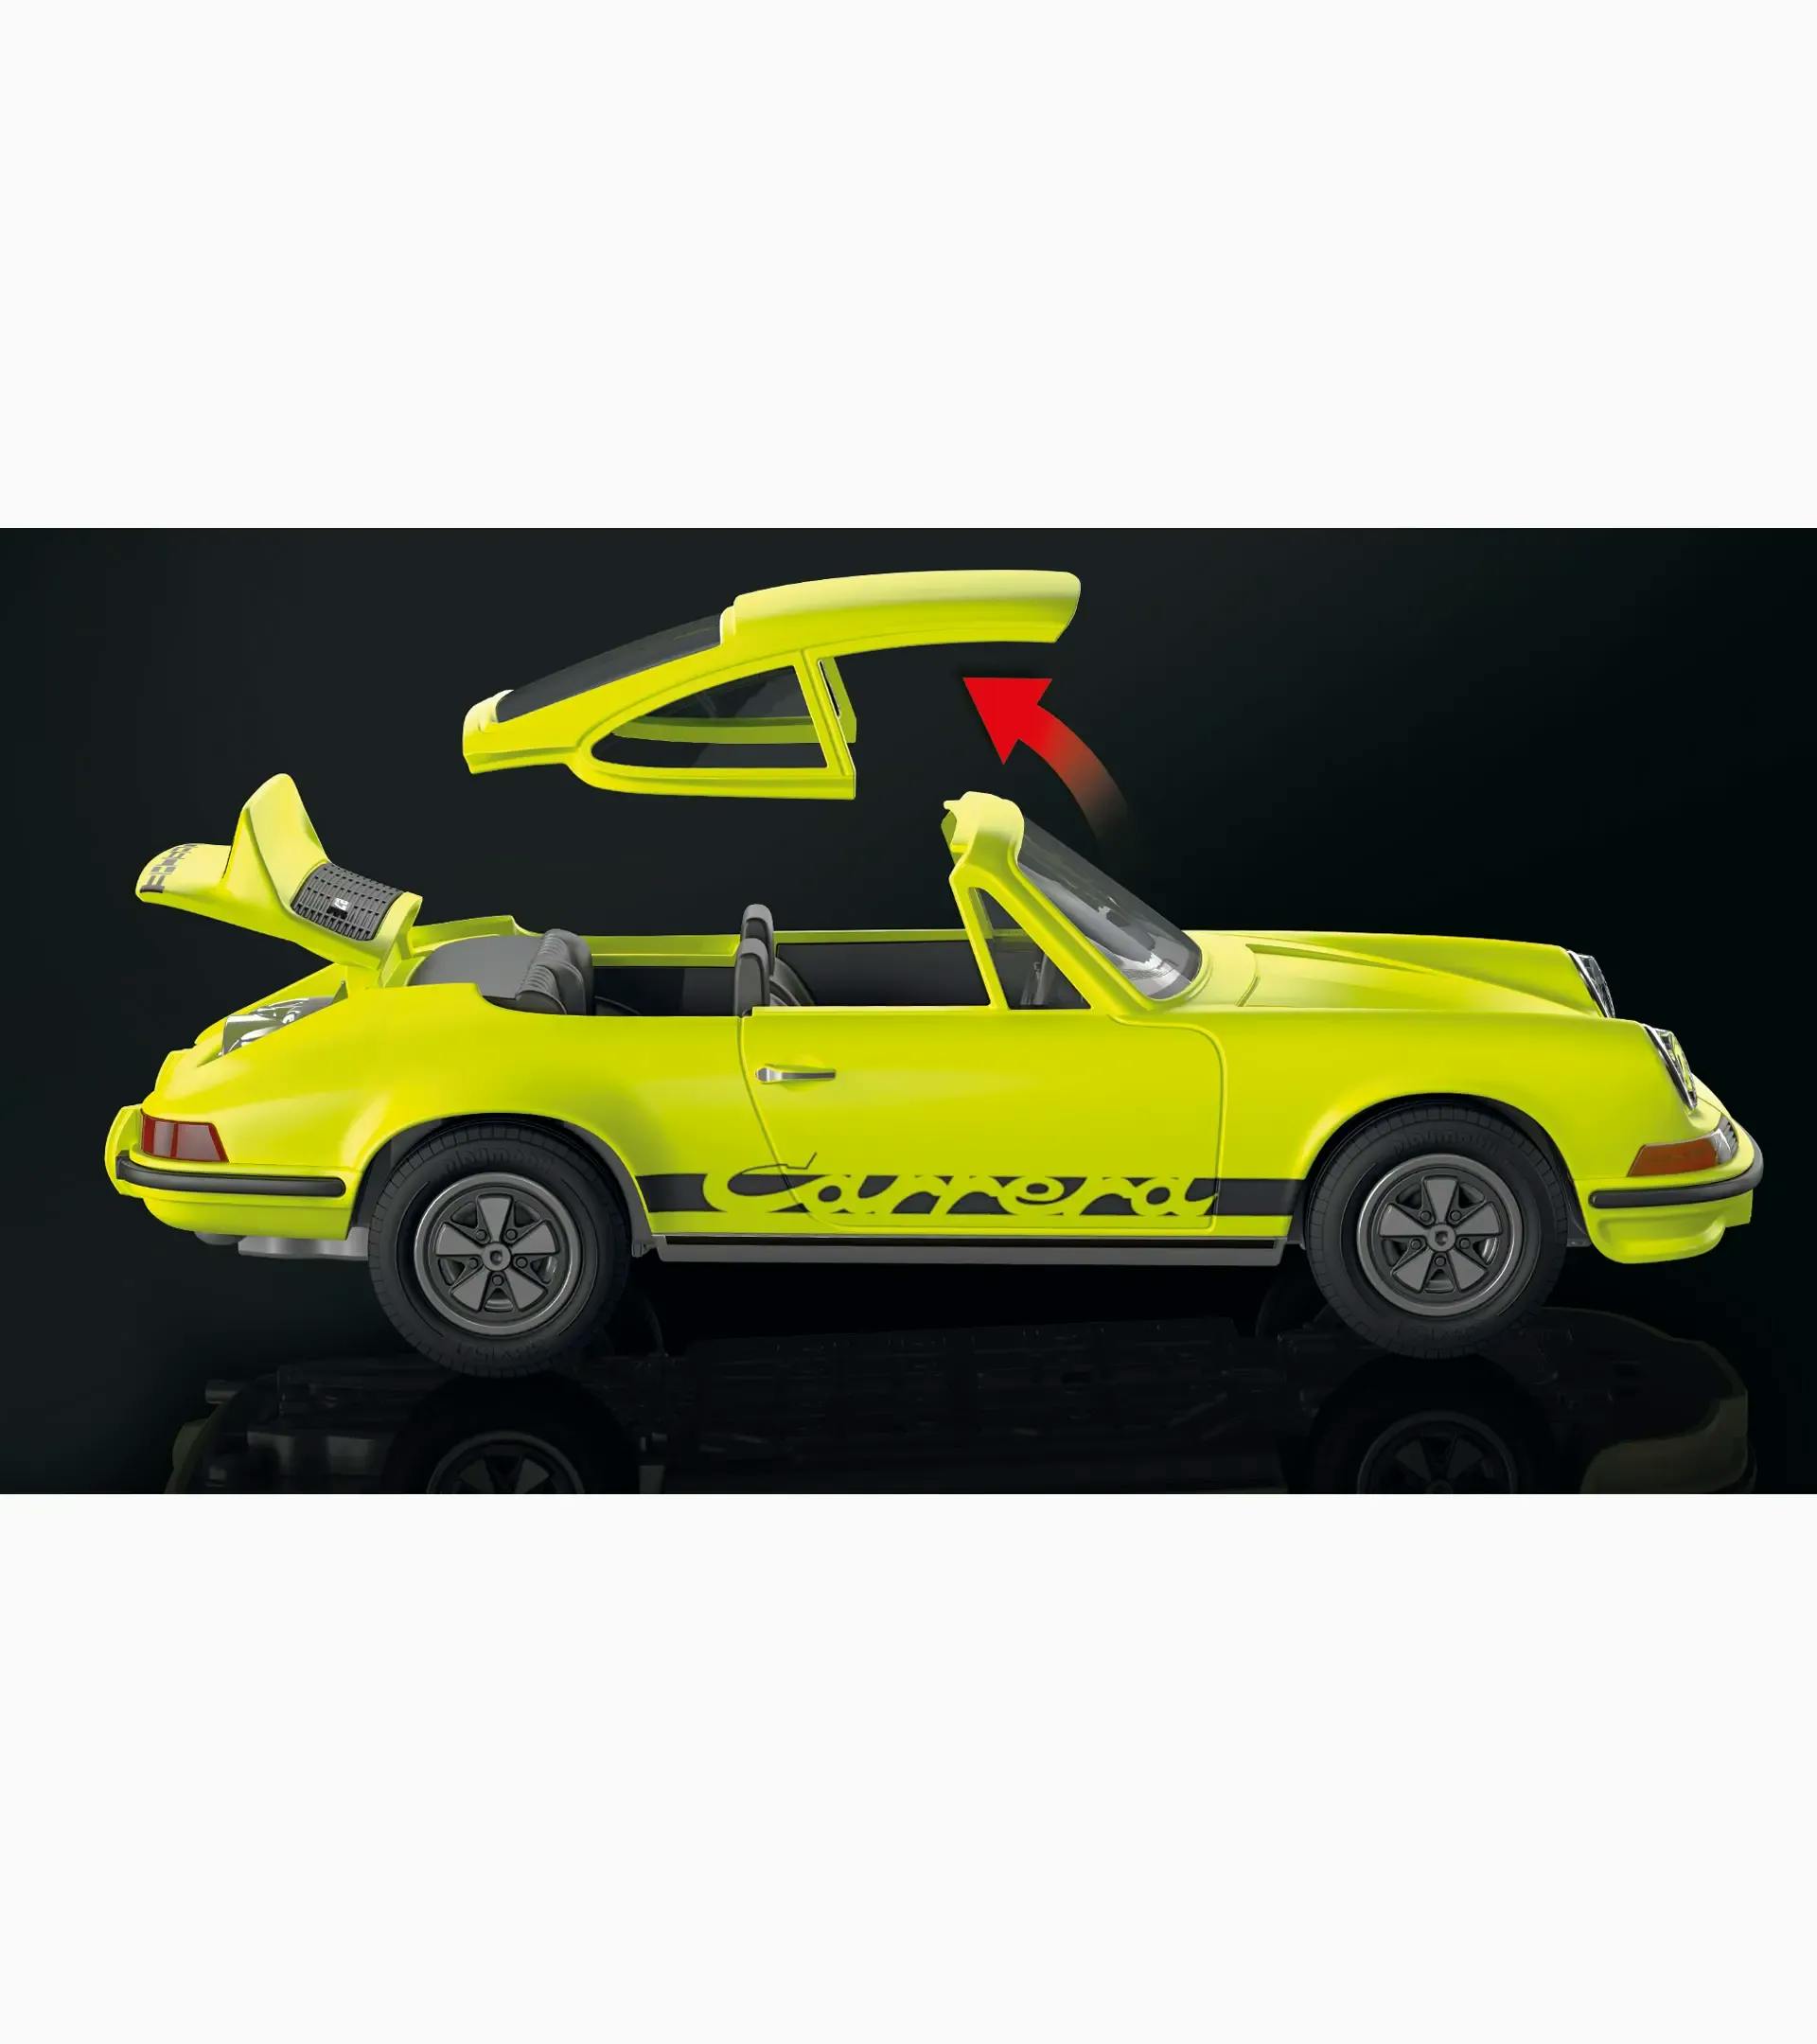 Playmobil Has Three Weird Porsches You Can Buy for Less Than $70